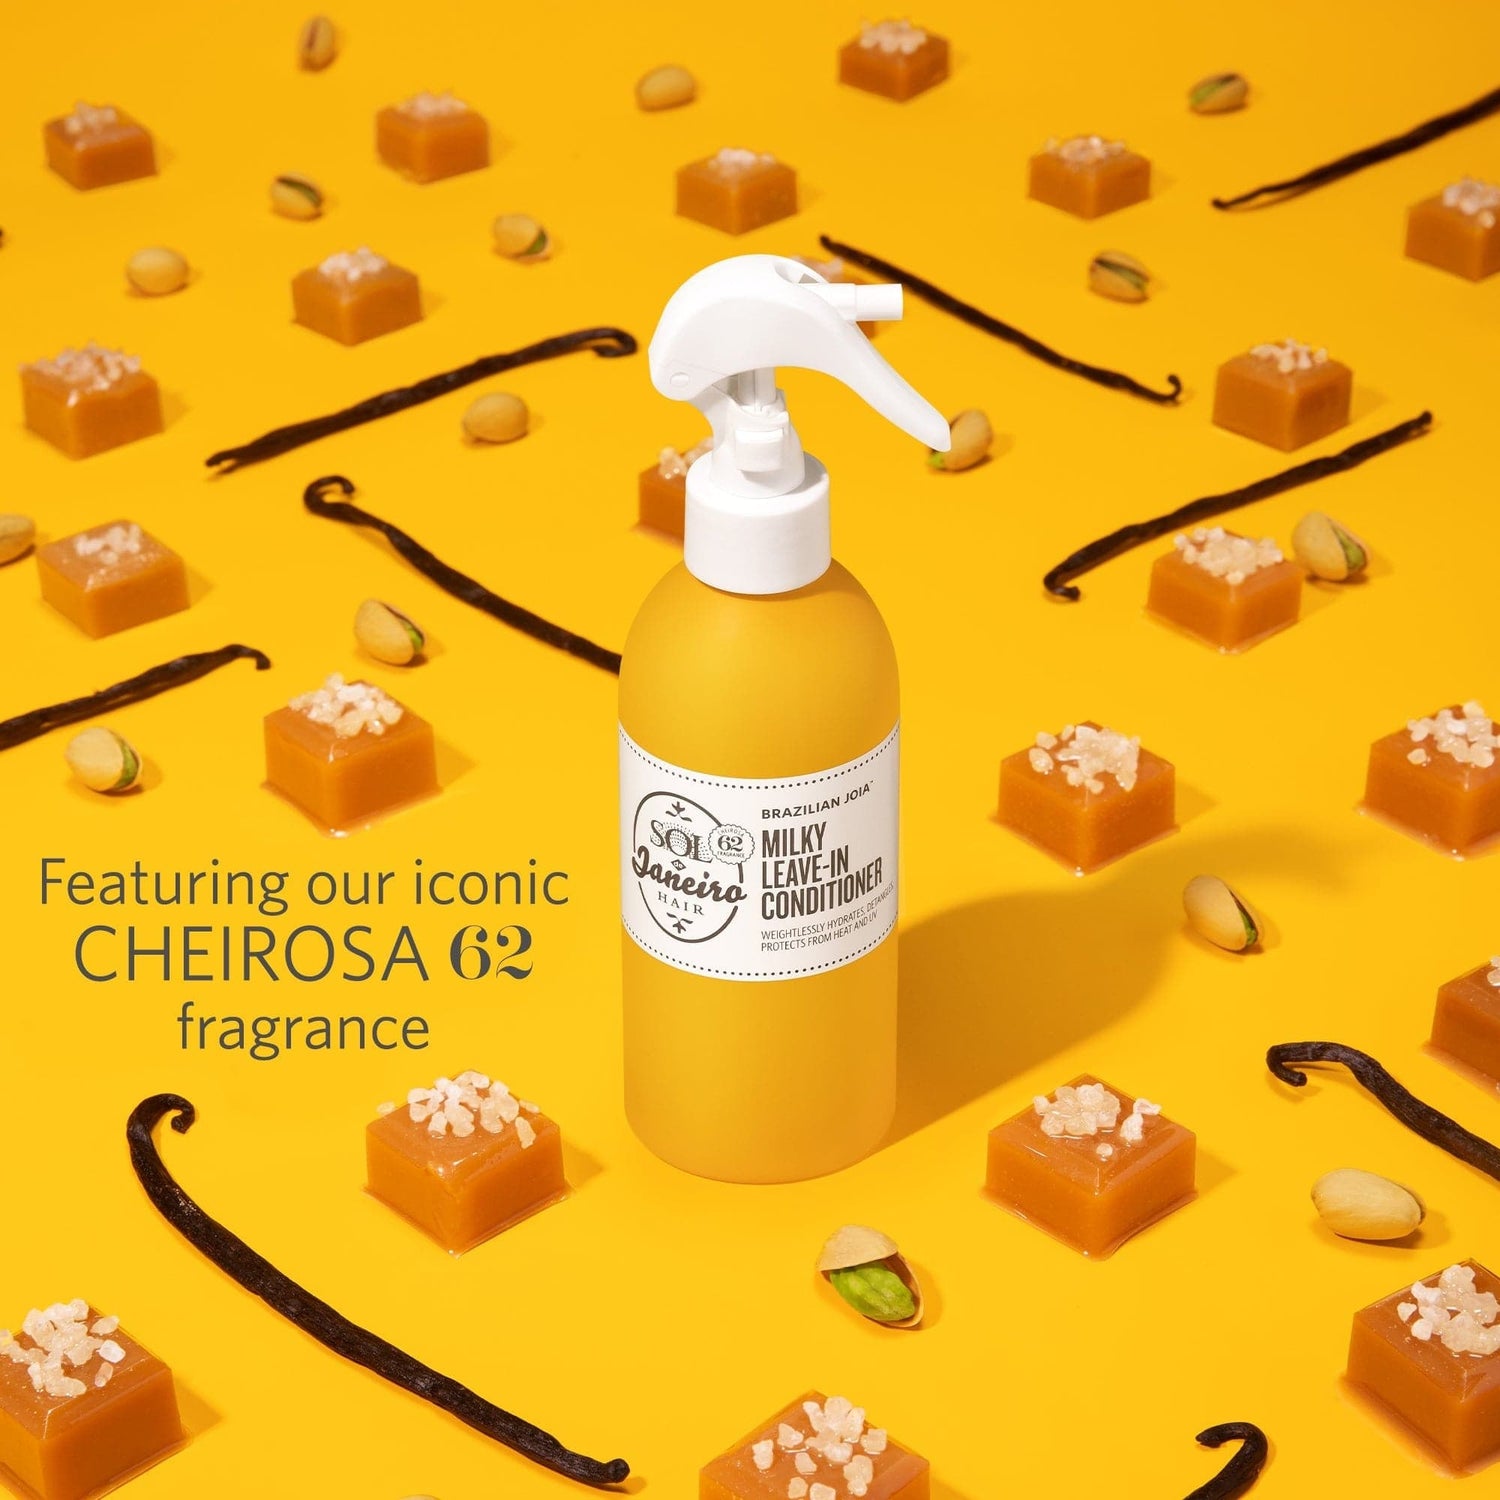 Featuring our cheirosa 62 fragrance